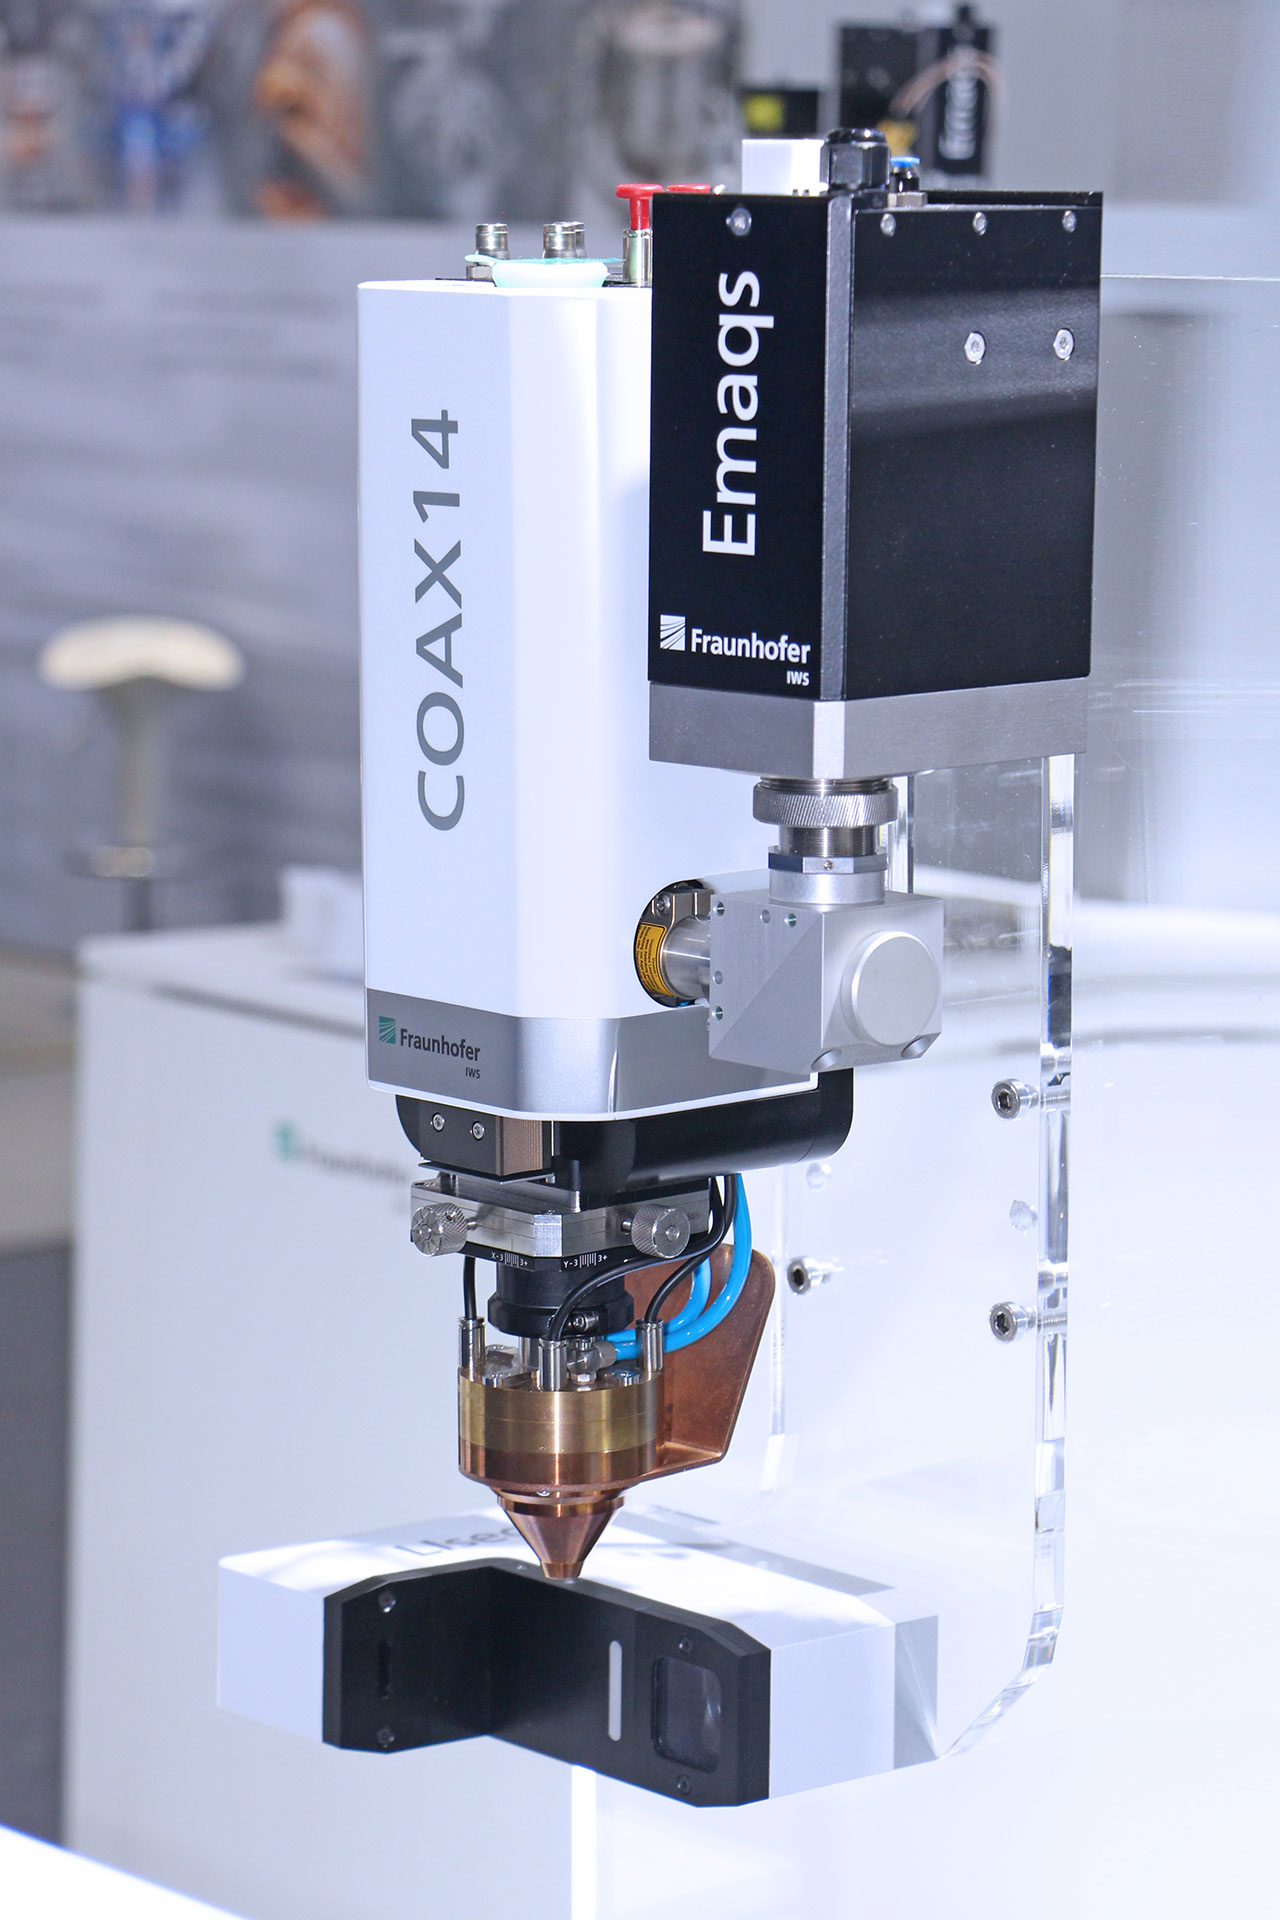 COAX powder nozzle with Emaqs camera: Temperature field measurement in the melt pool for precise laser powder cladding.